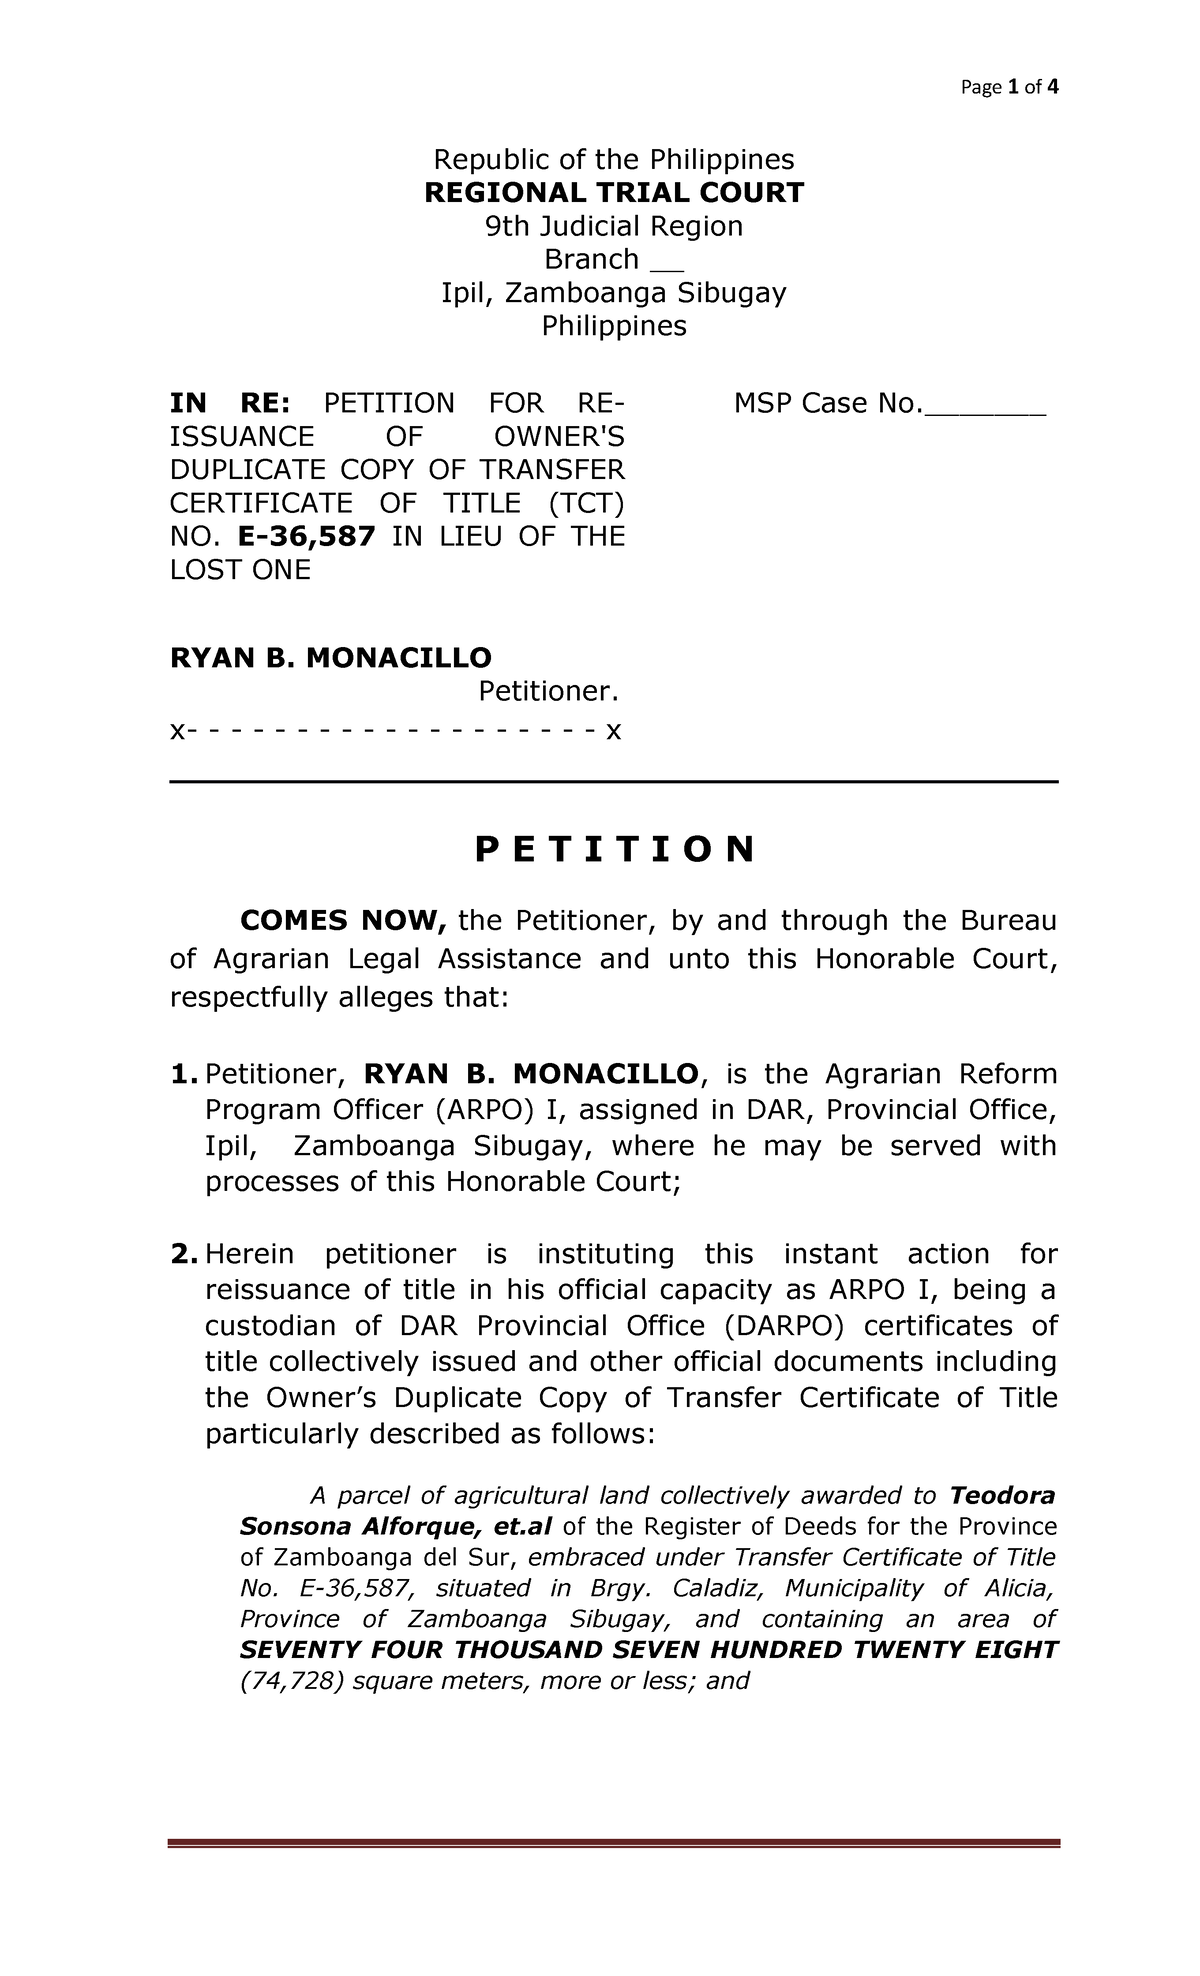 Reissuance Of Title And Judicial Affidavit Ryan Copy Republic Of The Philippines Regional 6566